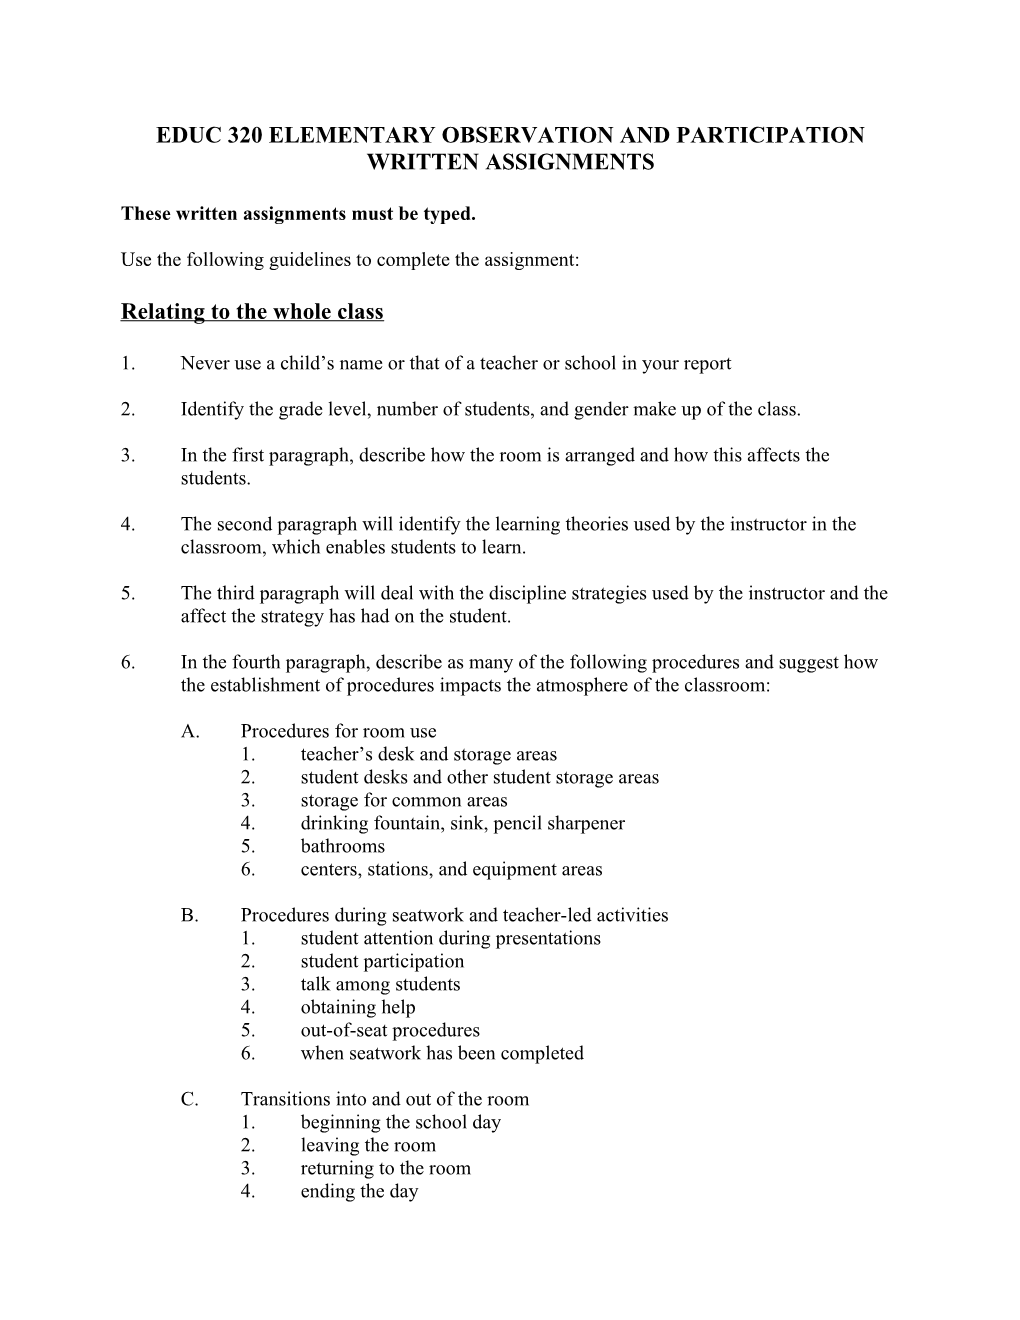 Educ 320 Elementary Observation and Participation Written Assignments